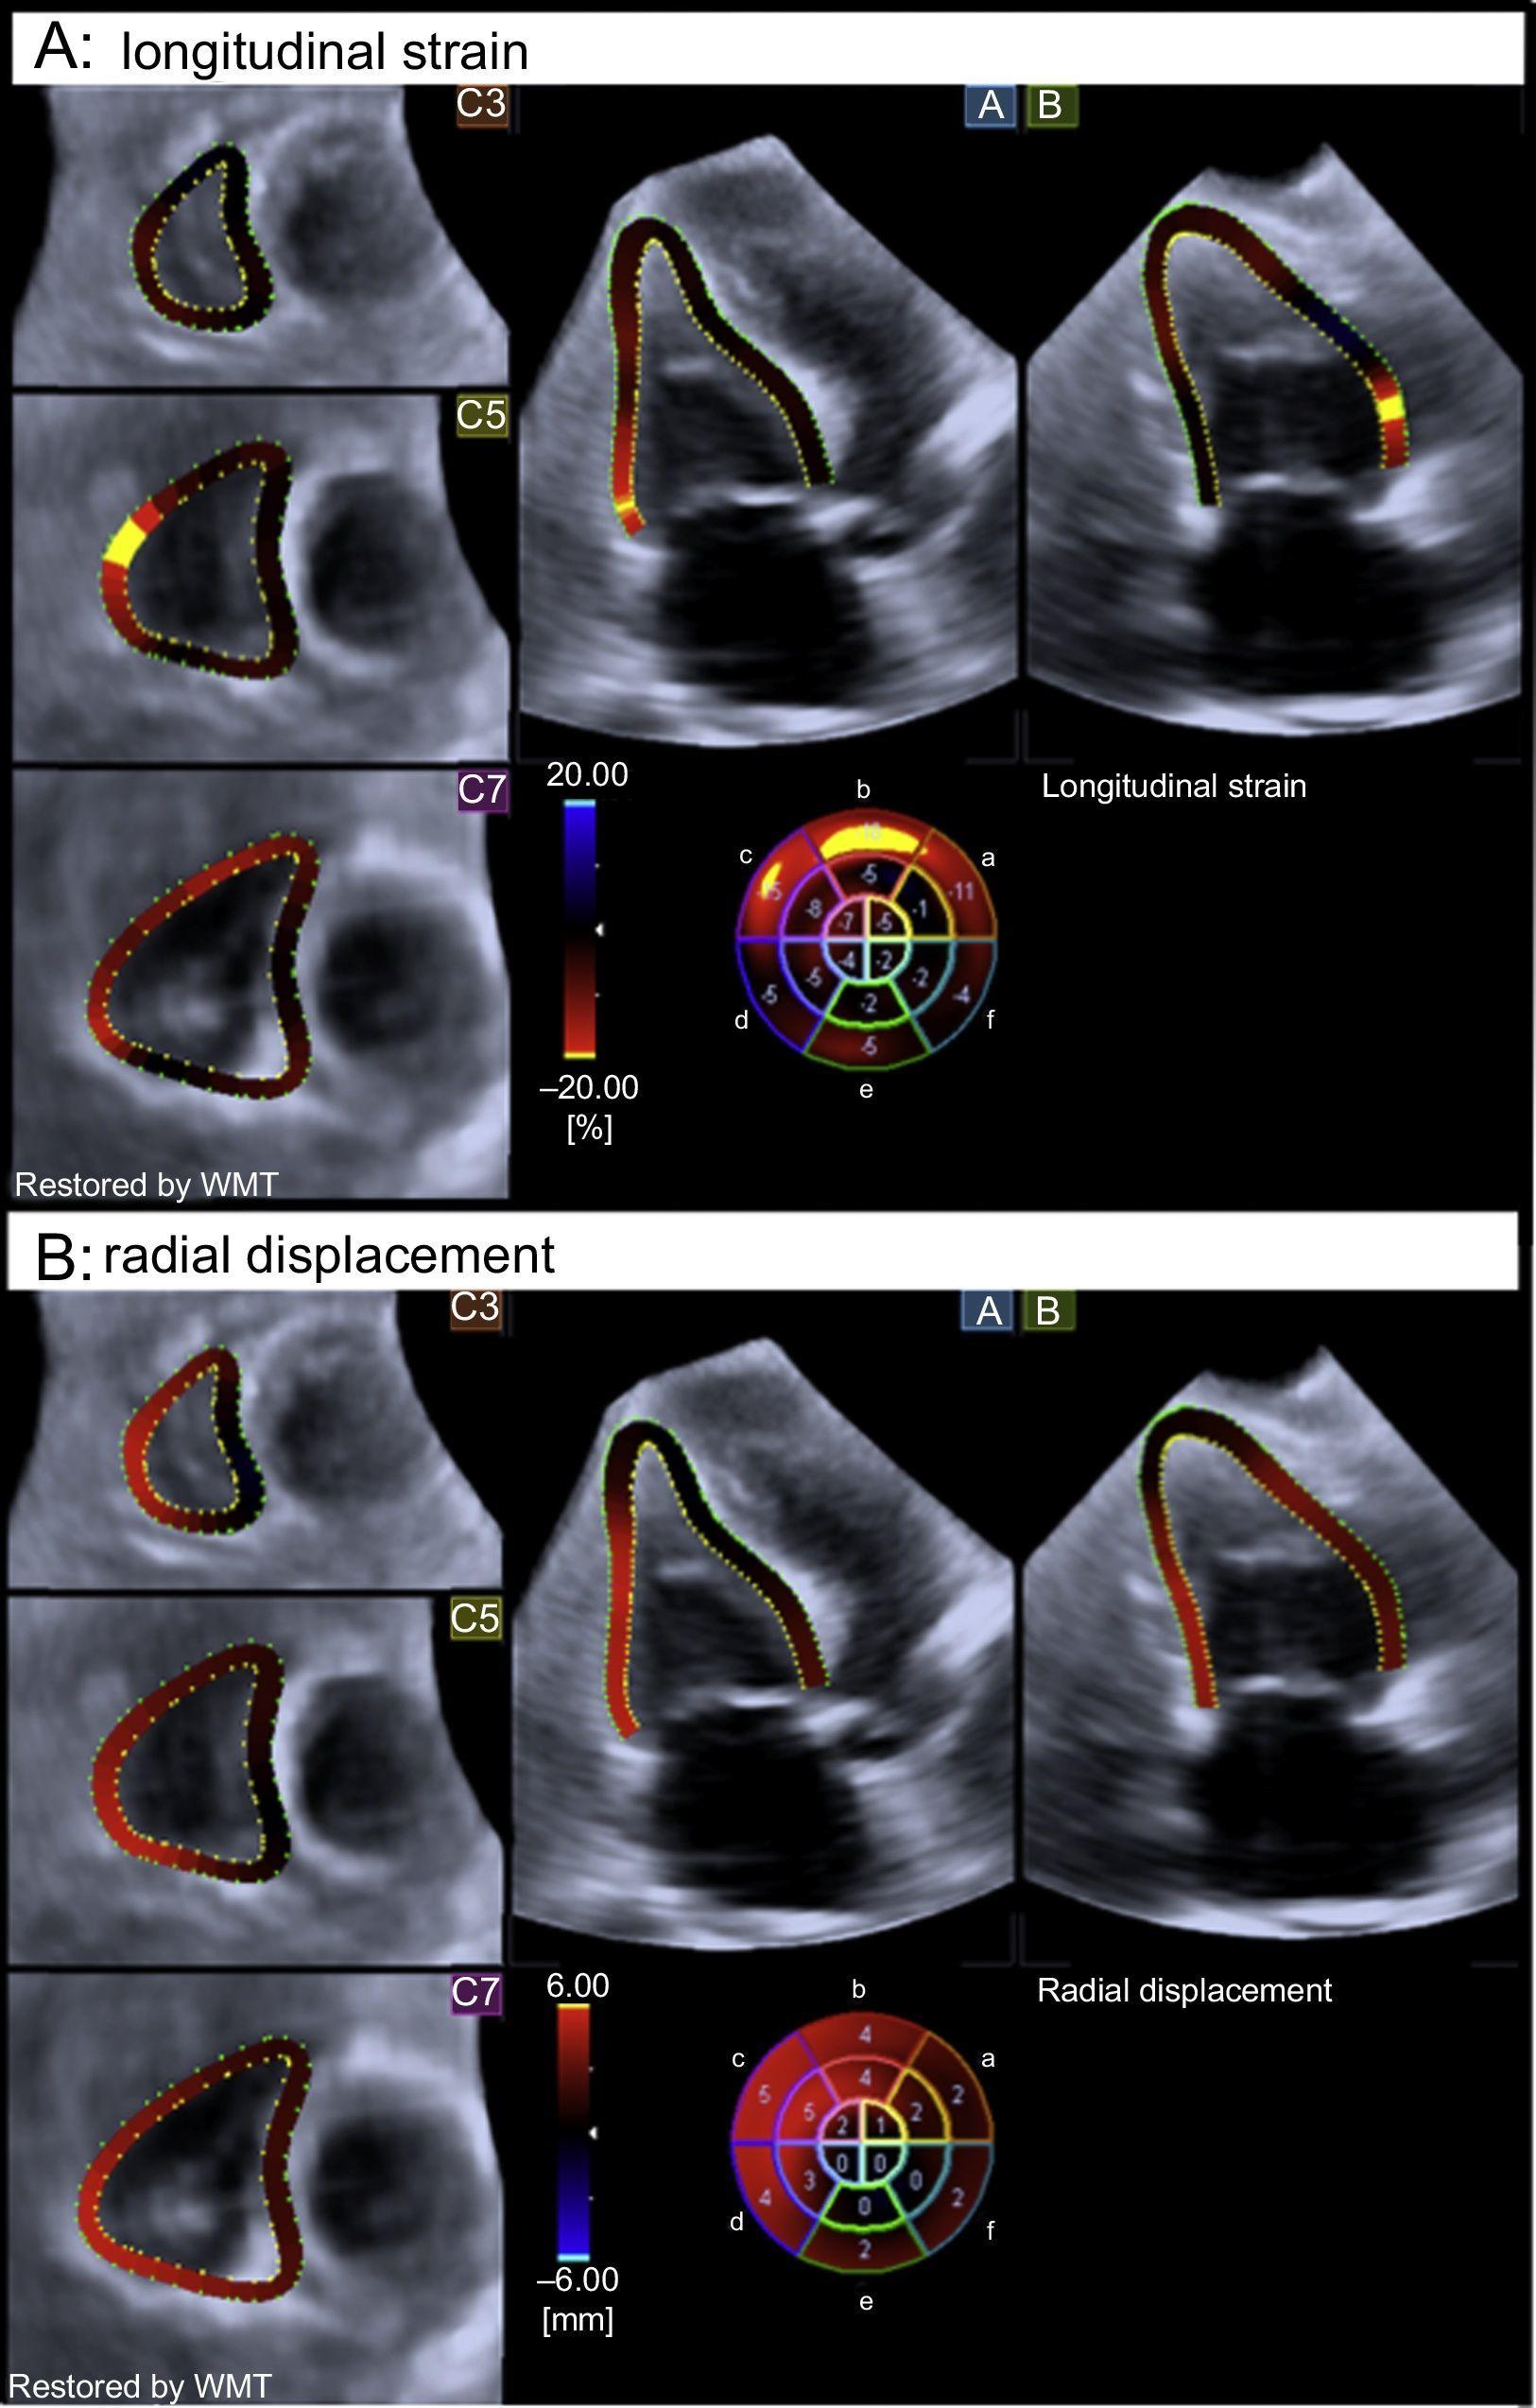 Three and two-dimensional cardiac mechanics by speckle tracking are  predictors of outcomes in chagas heart disease